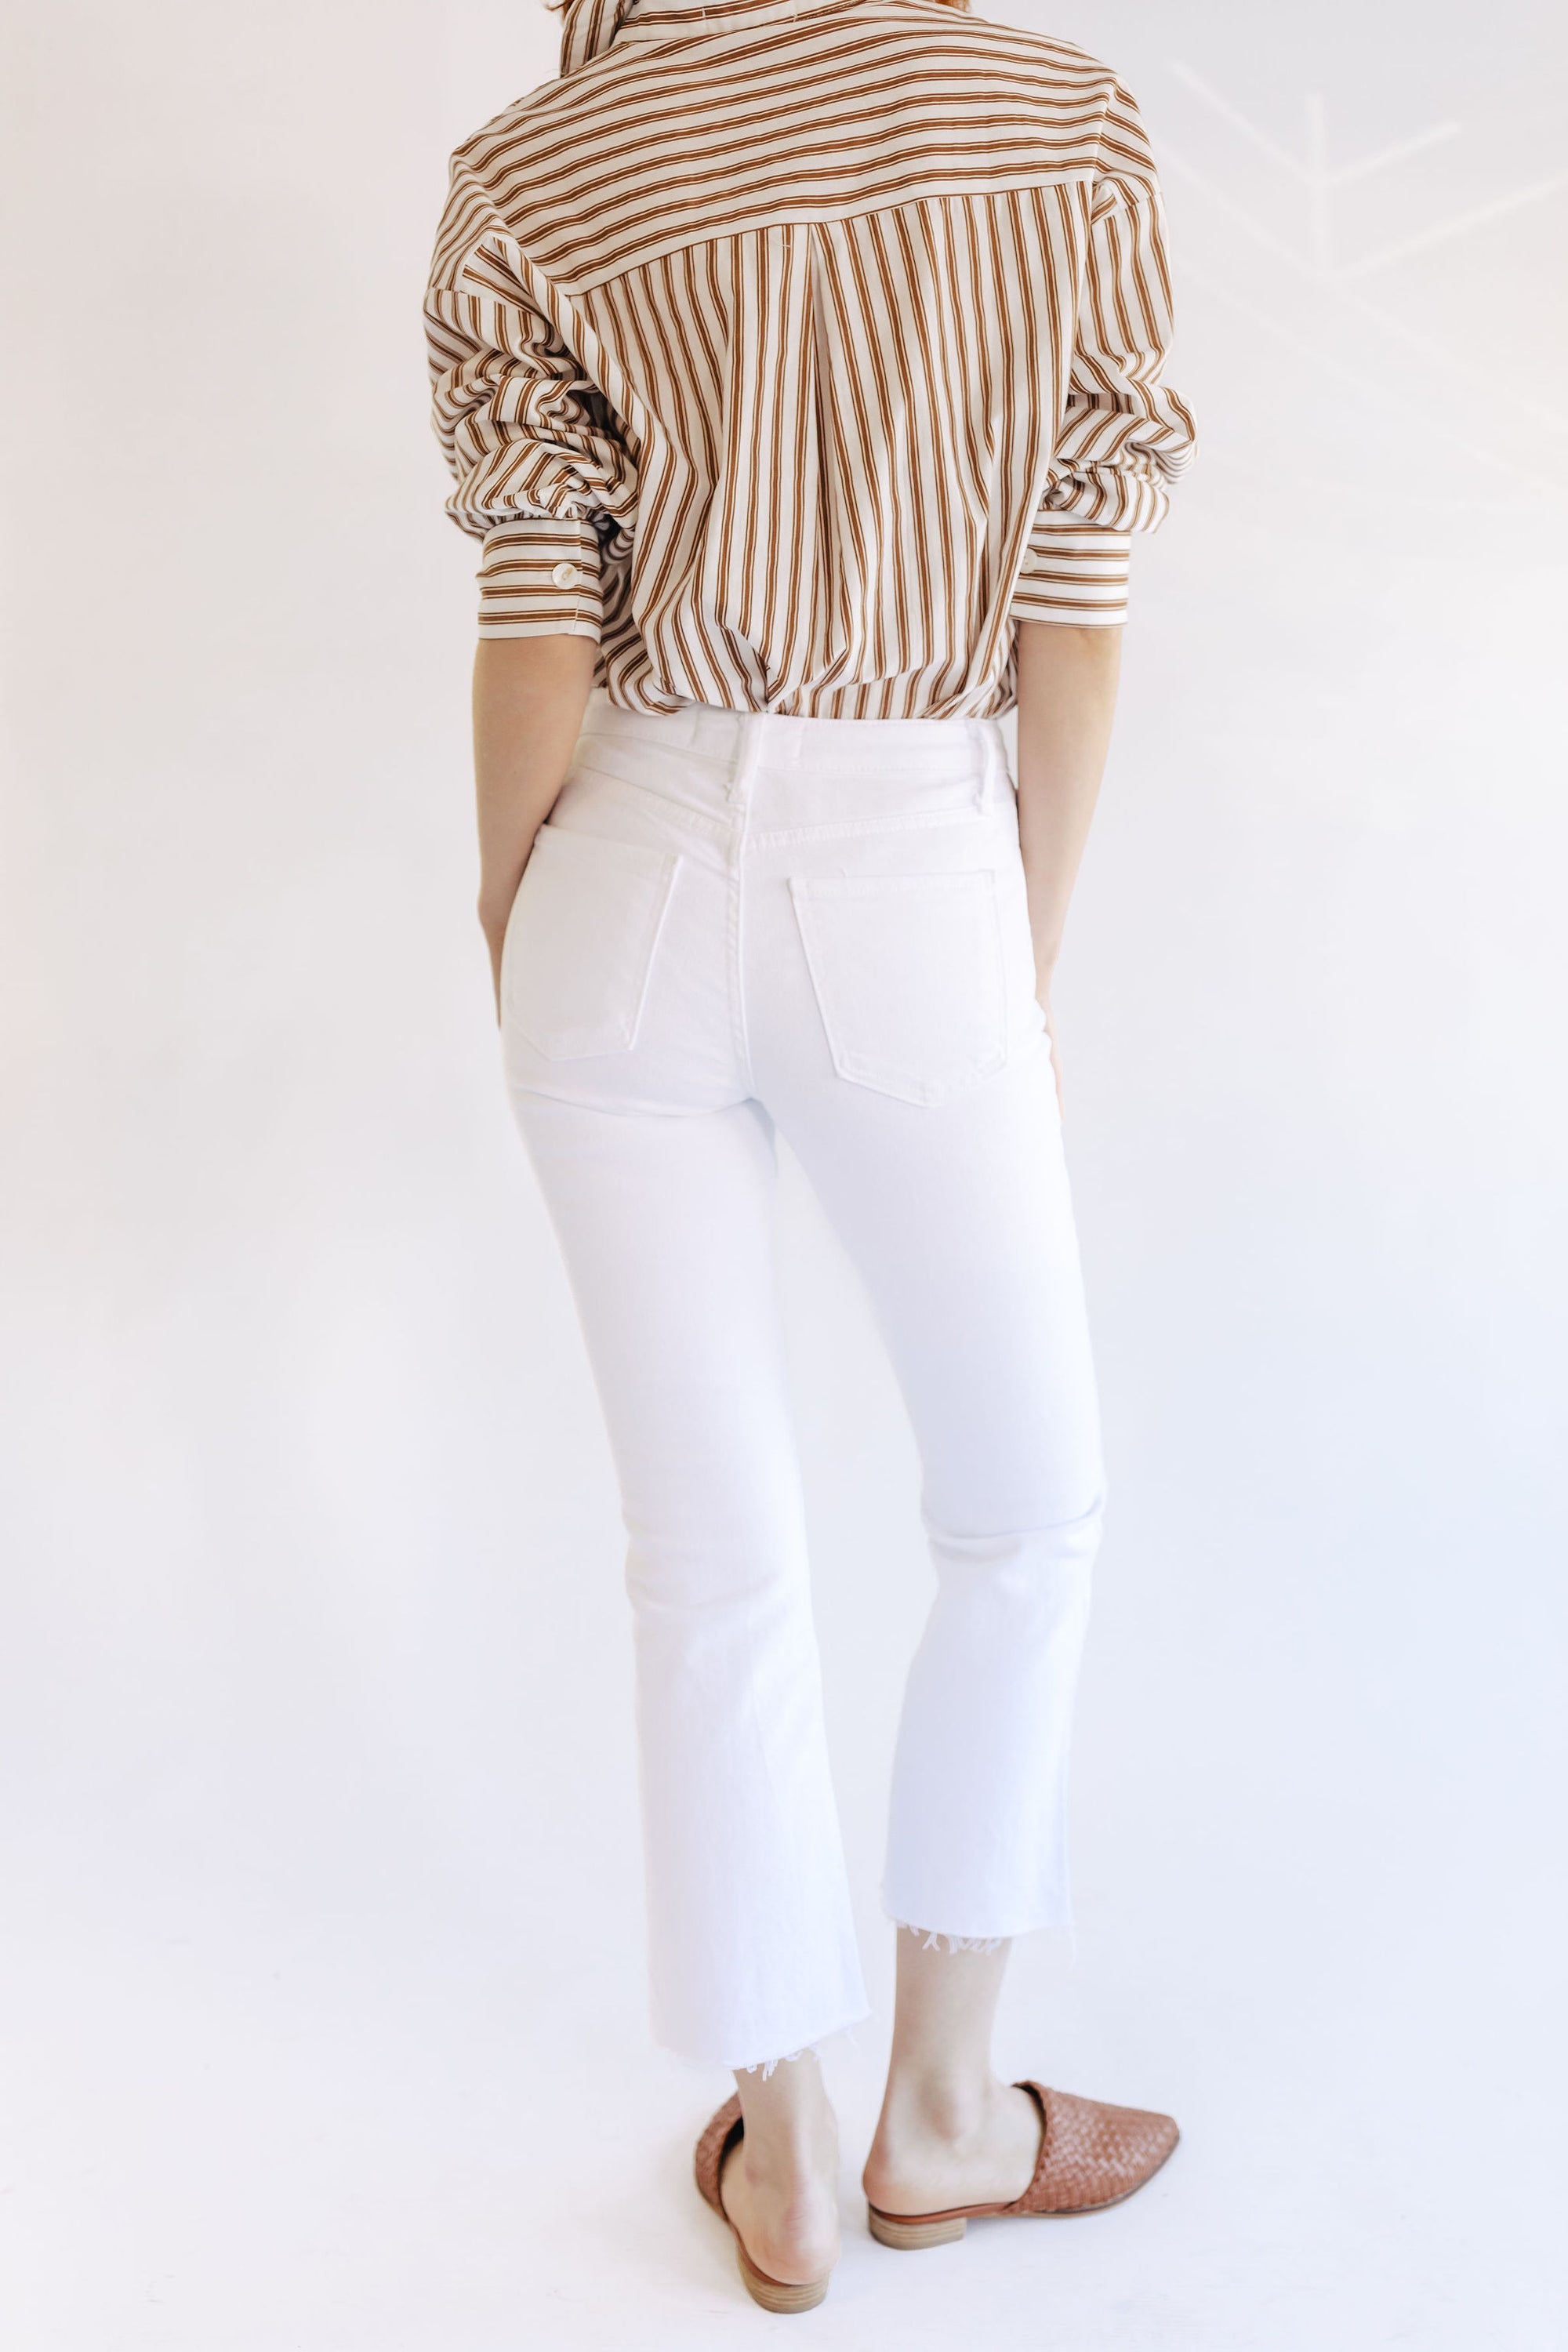 The Kyle Vintage Cropped Flare Jeans